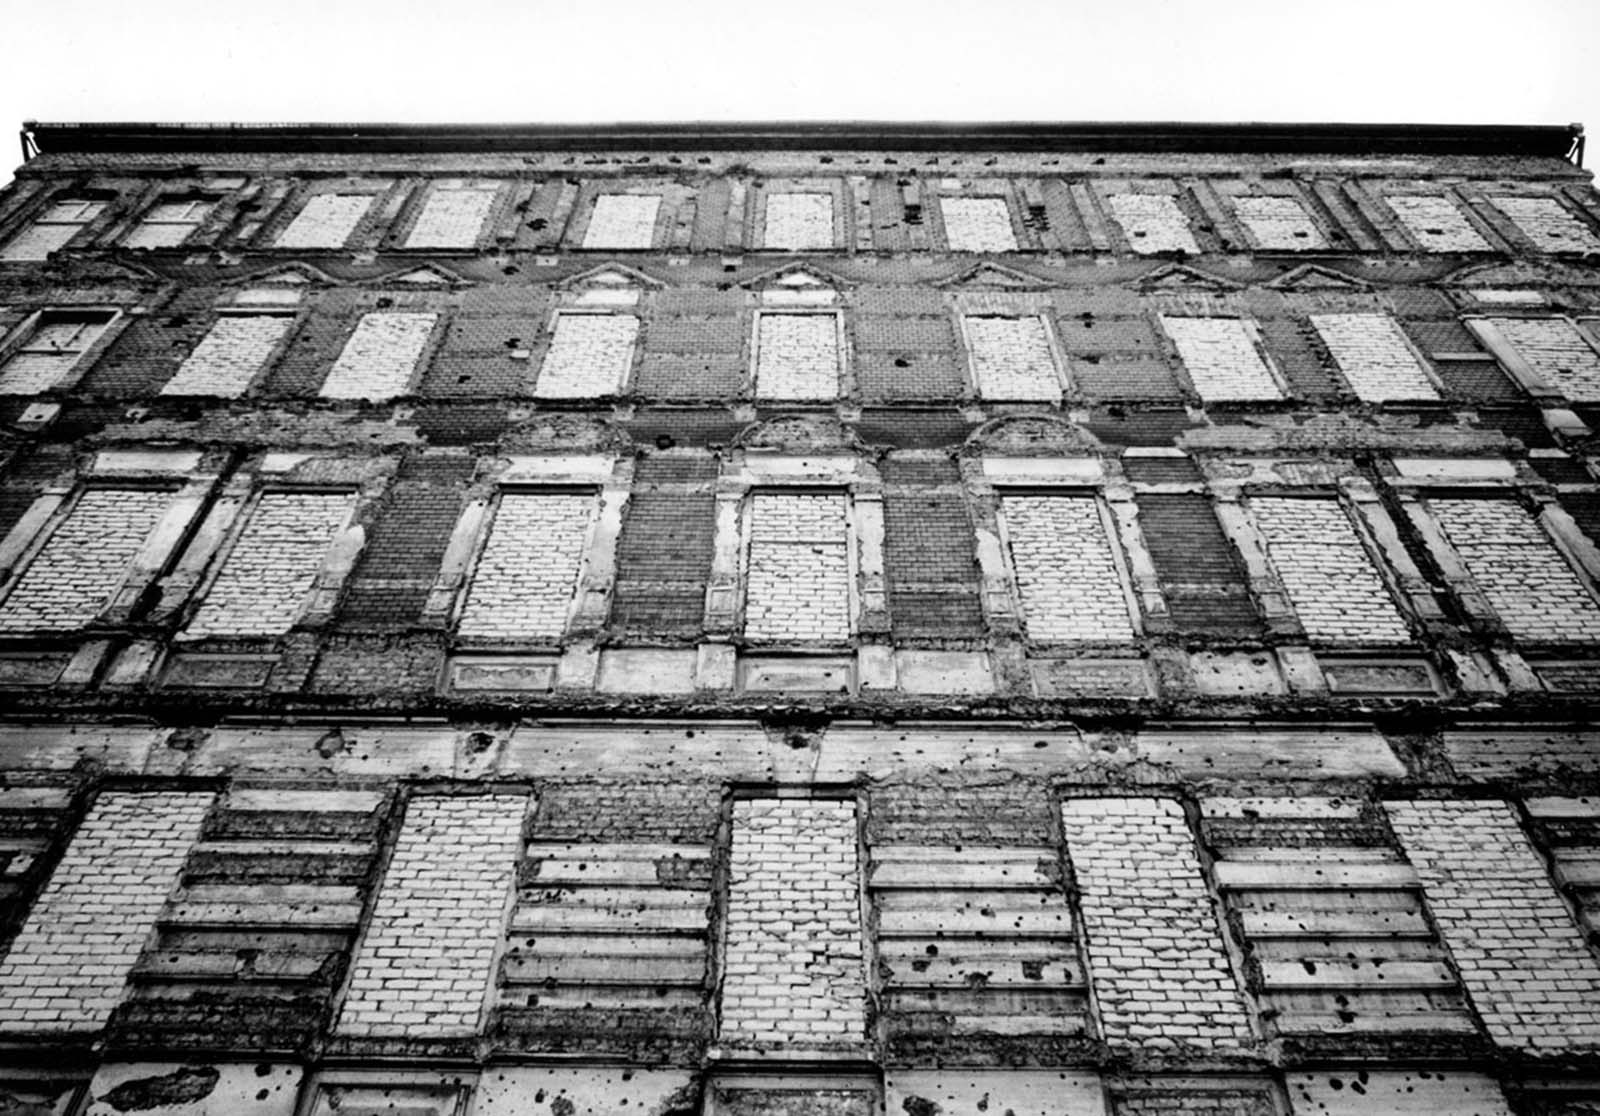 After East Germans jumped to freedom in the West, the windows of this building on the eastern side of the wall were bricked over. The building was later demolished, 1962.